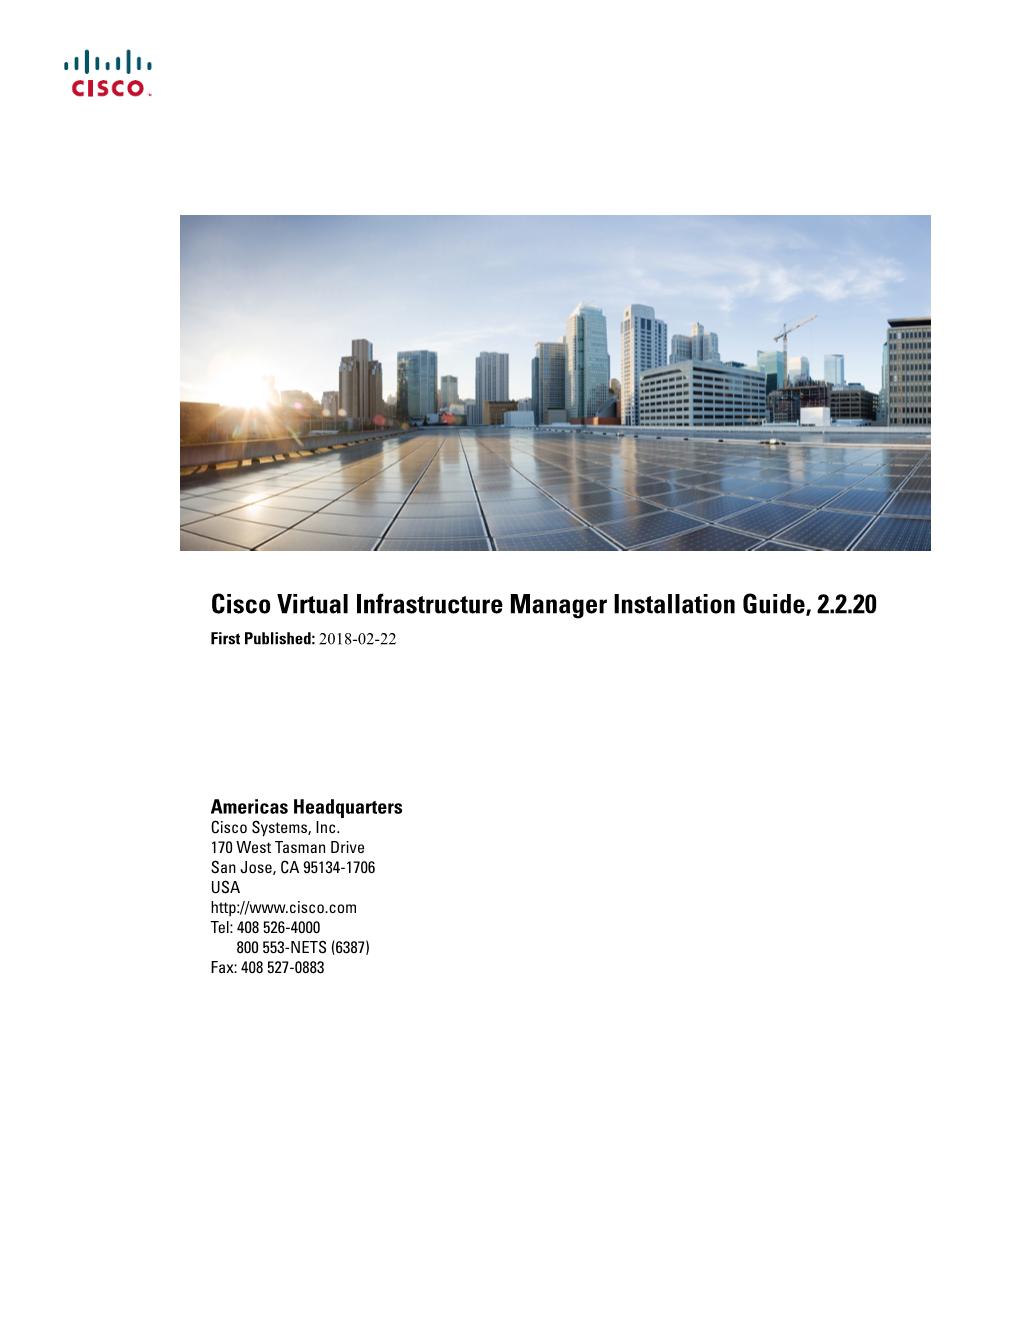 Cisco Virtual Infrastructure Manager Installation Guide, 2.2.20 First Published: 2018-02-22